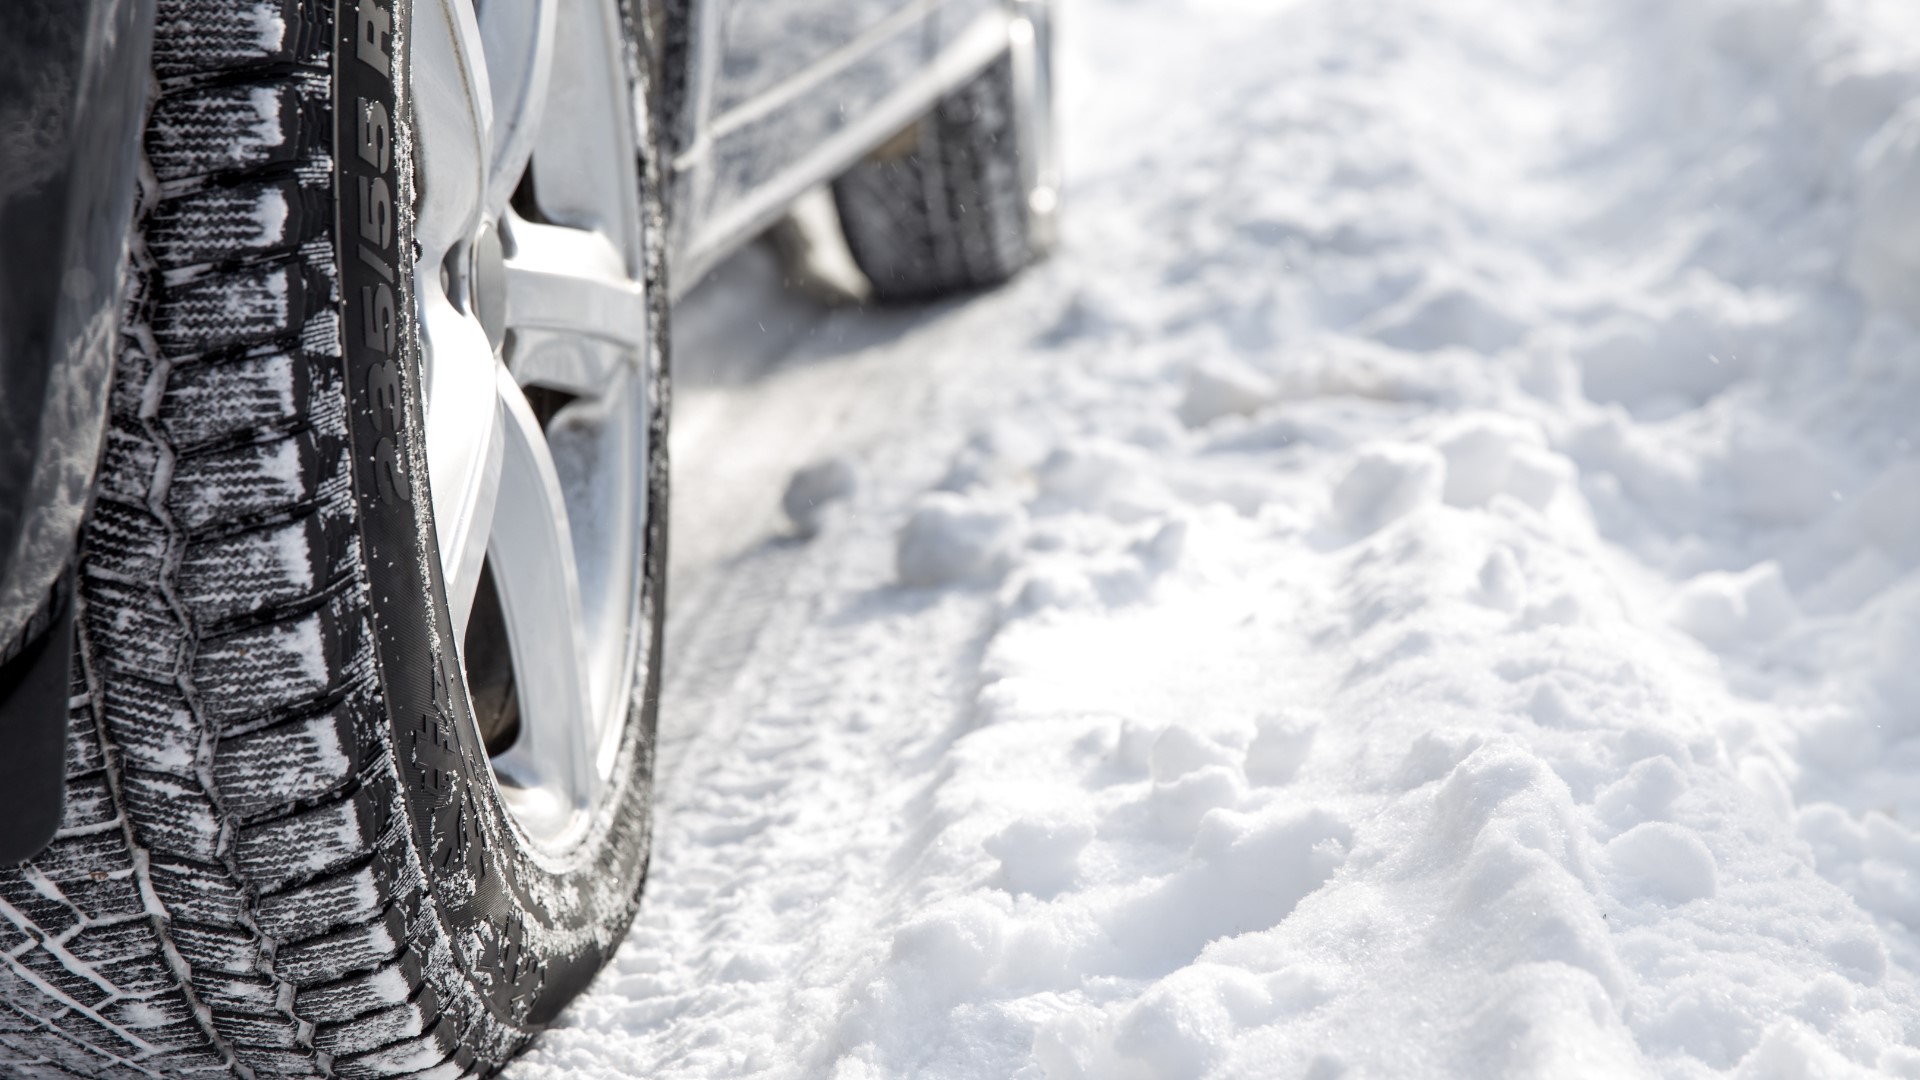 With winter weather in full swing, it’s a great time to review safe driving practices for the snowy roads.